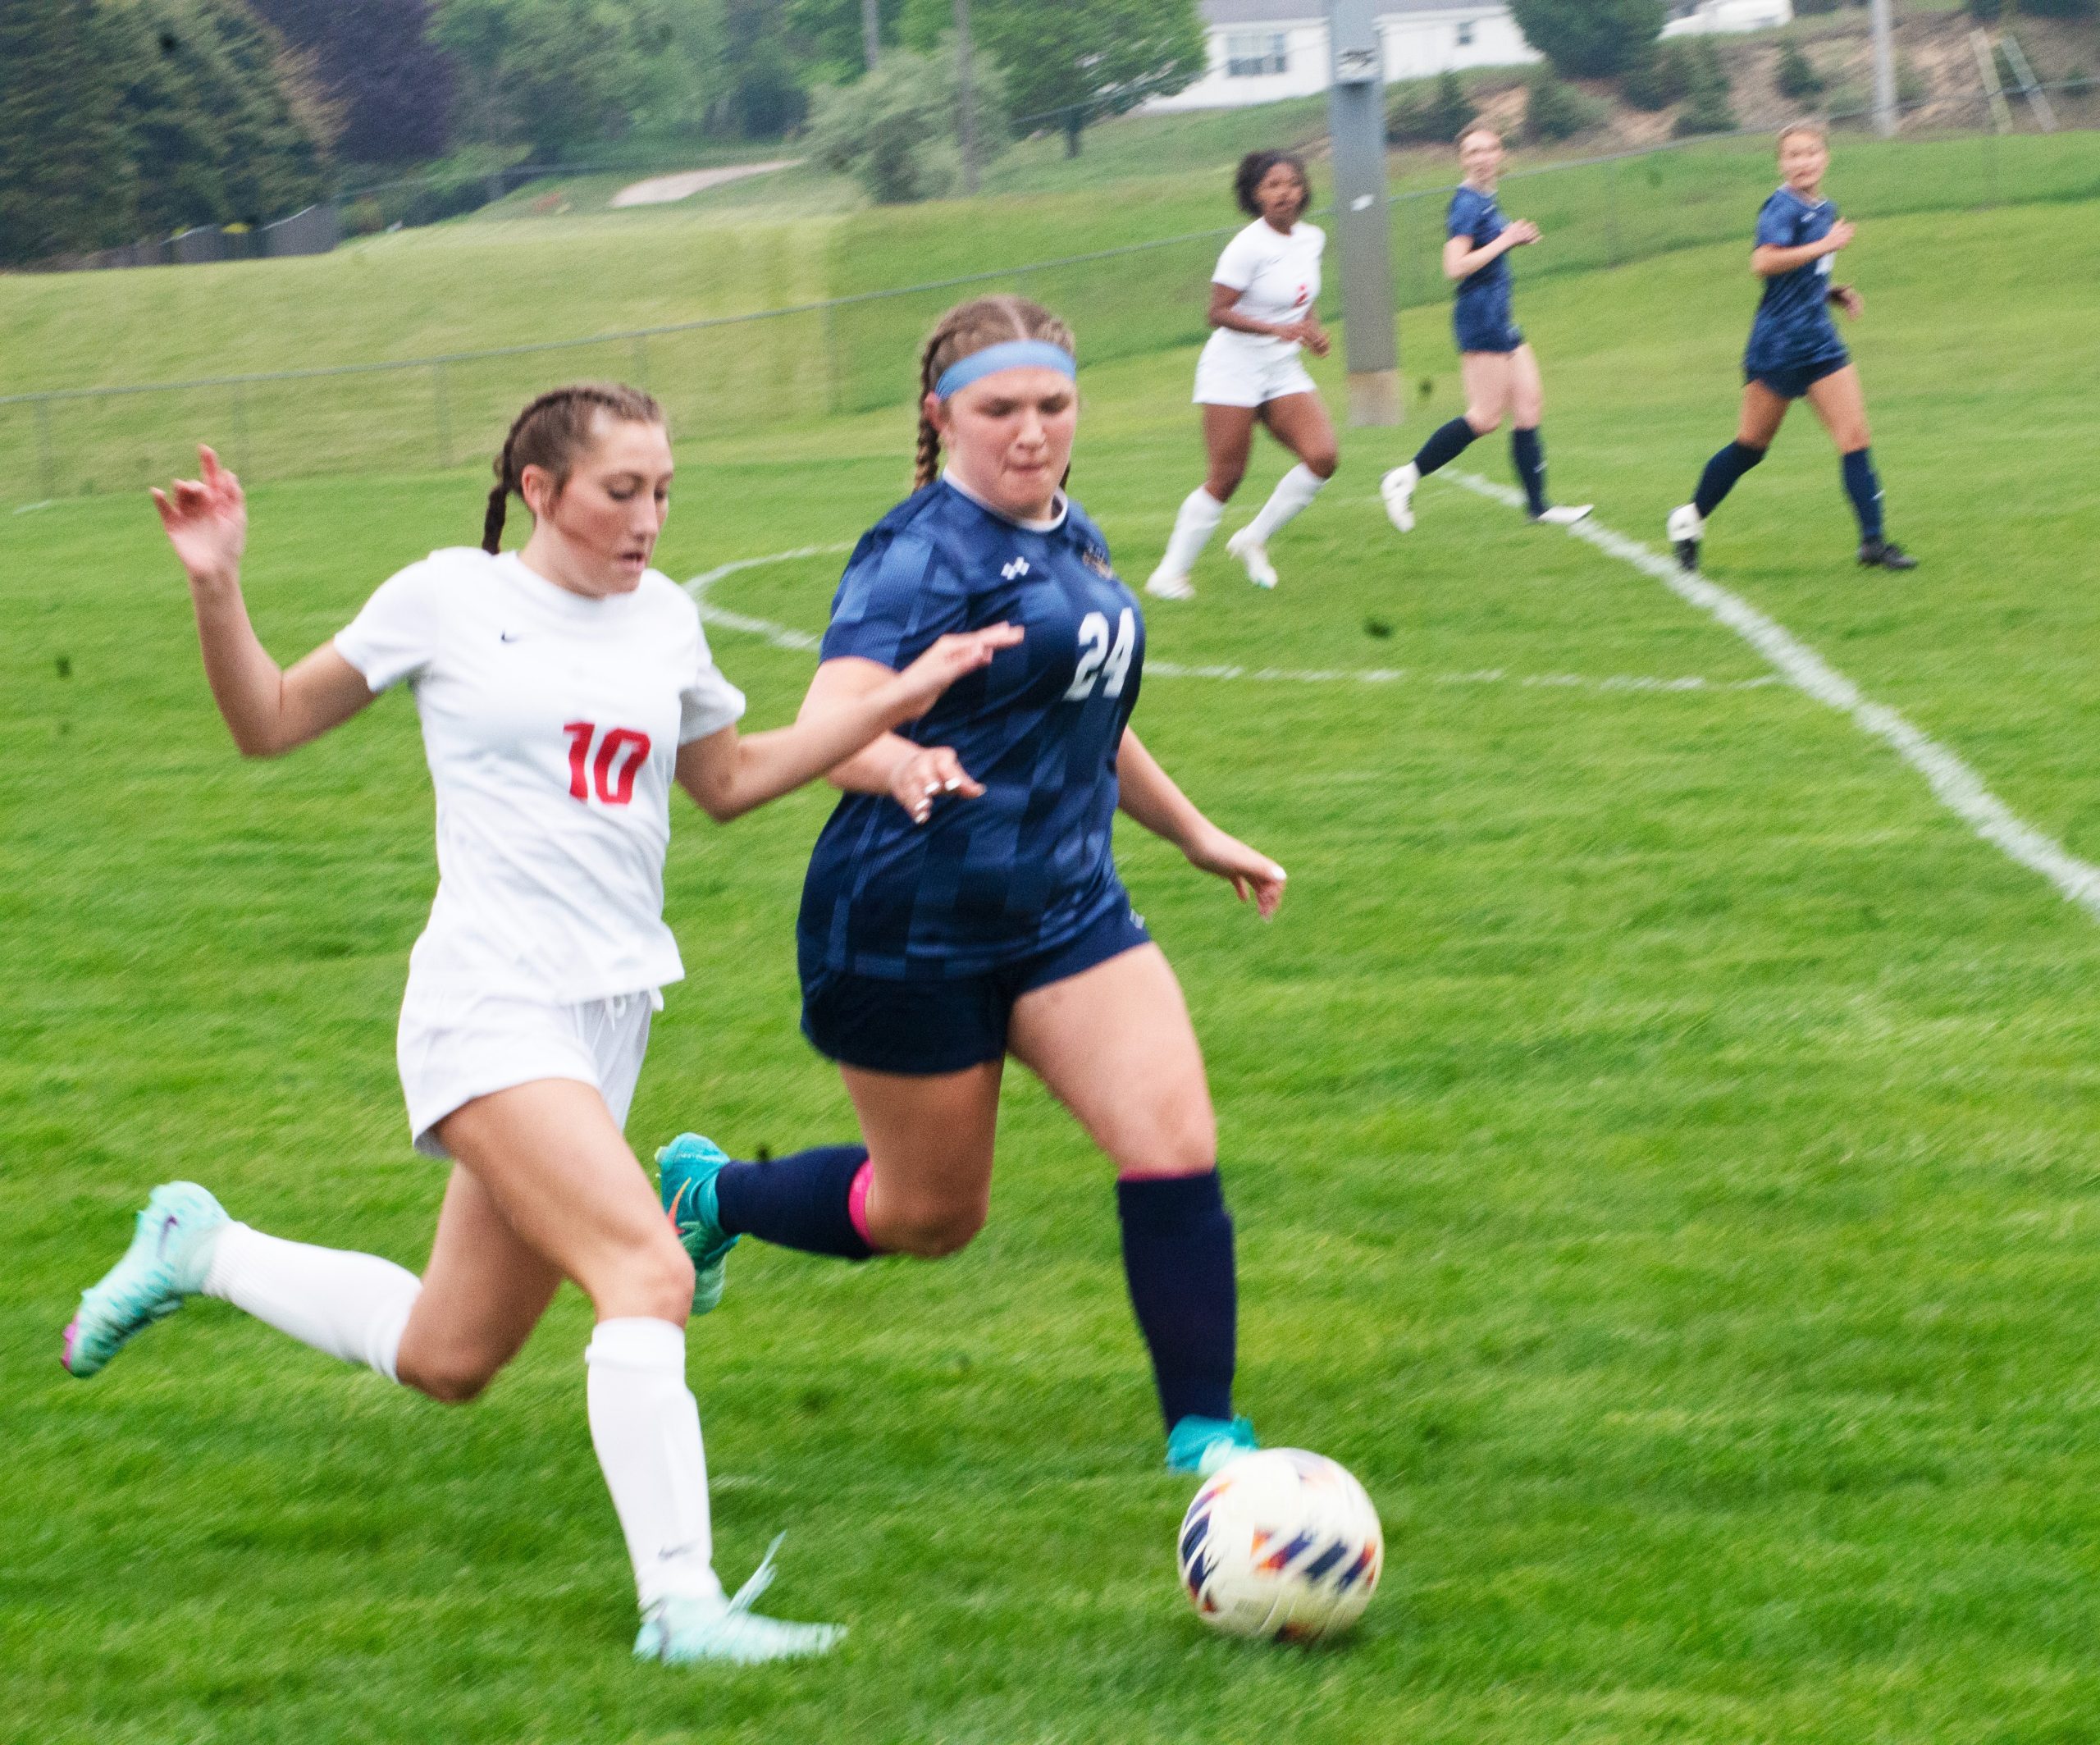 Manistee overcomes deficit, clips Whitehall in WMC soccer matchup